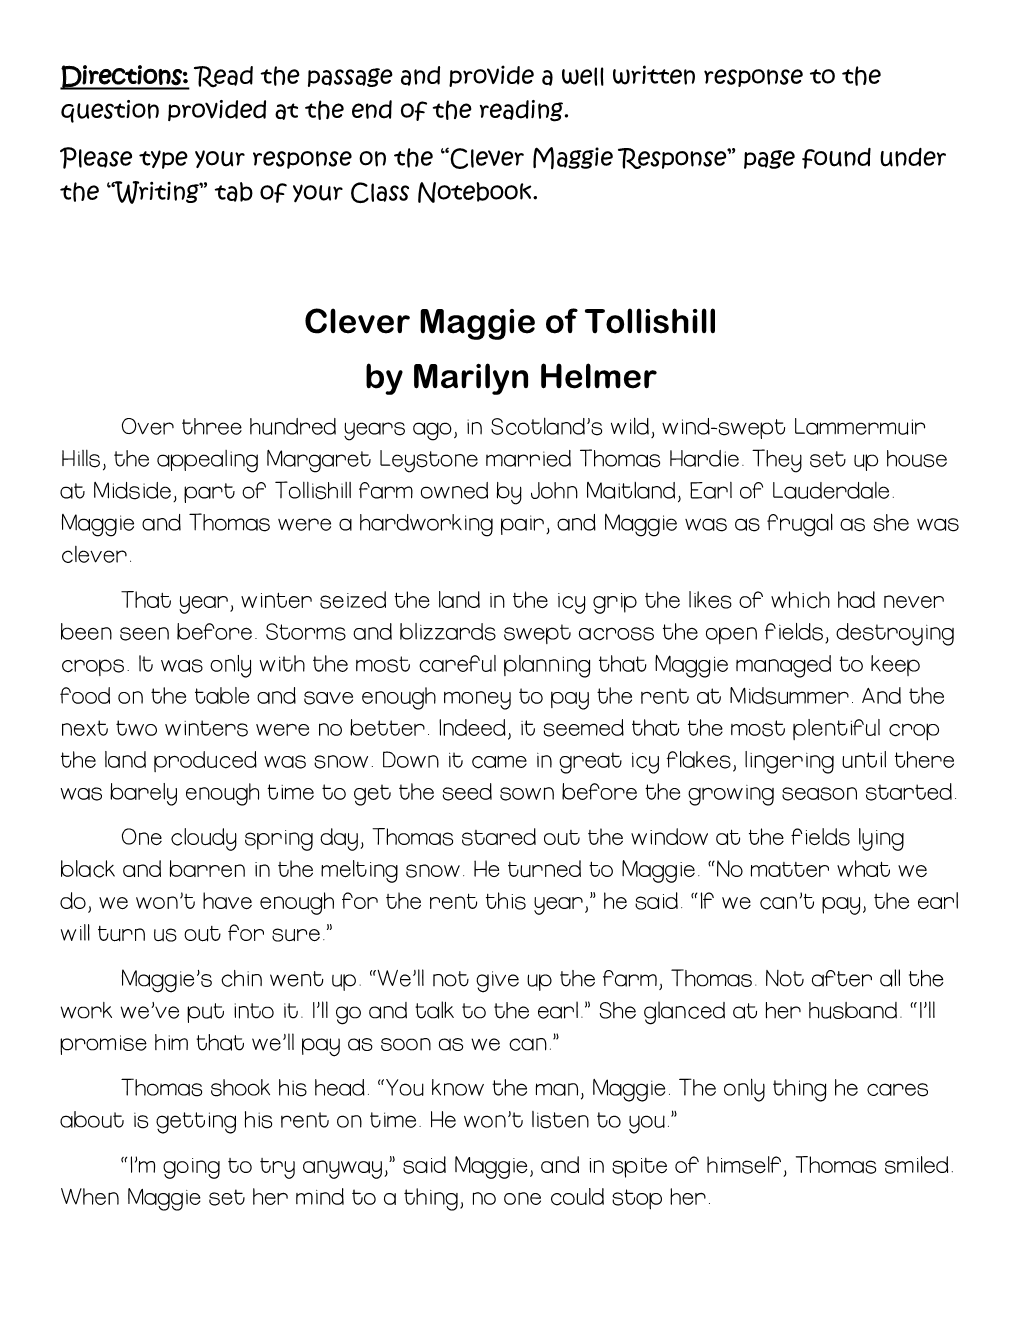 Clever Maggie of Tollishill by Marilyn Helmer